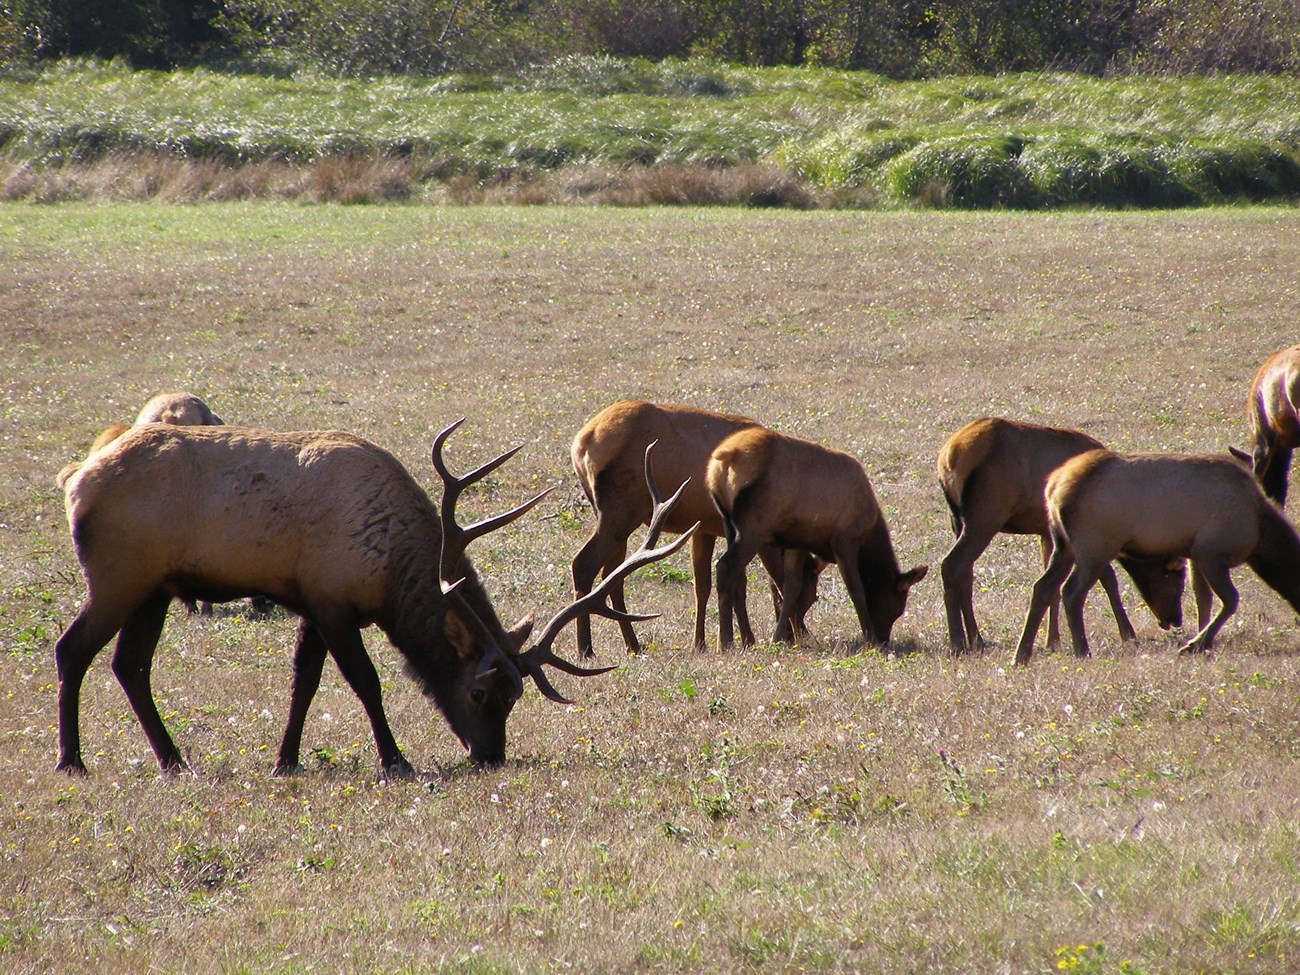 A bull elk with large antlers grazes near a cluster of cow elk.